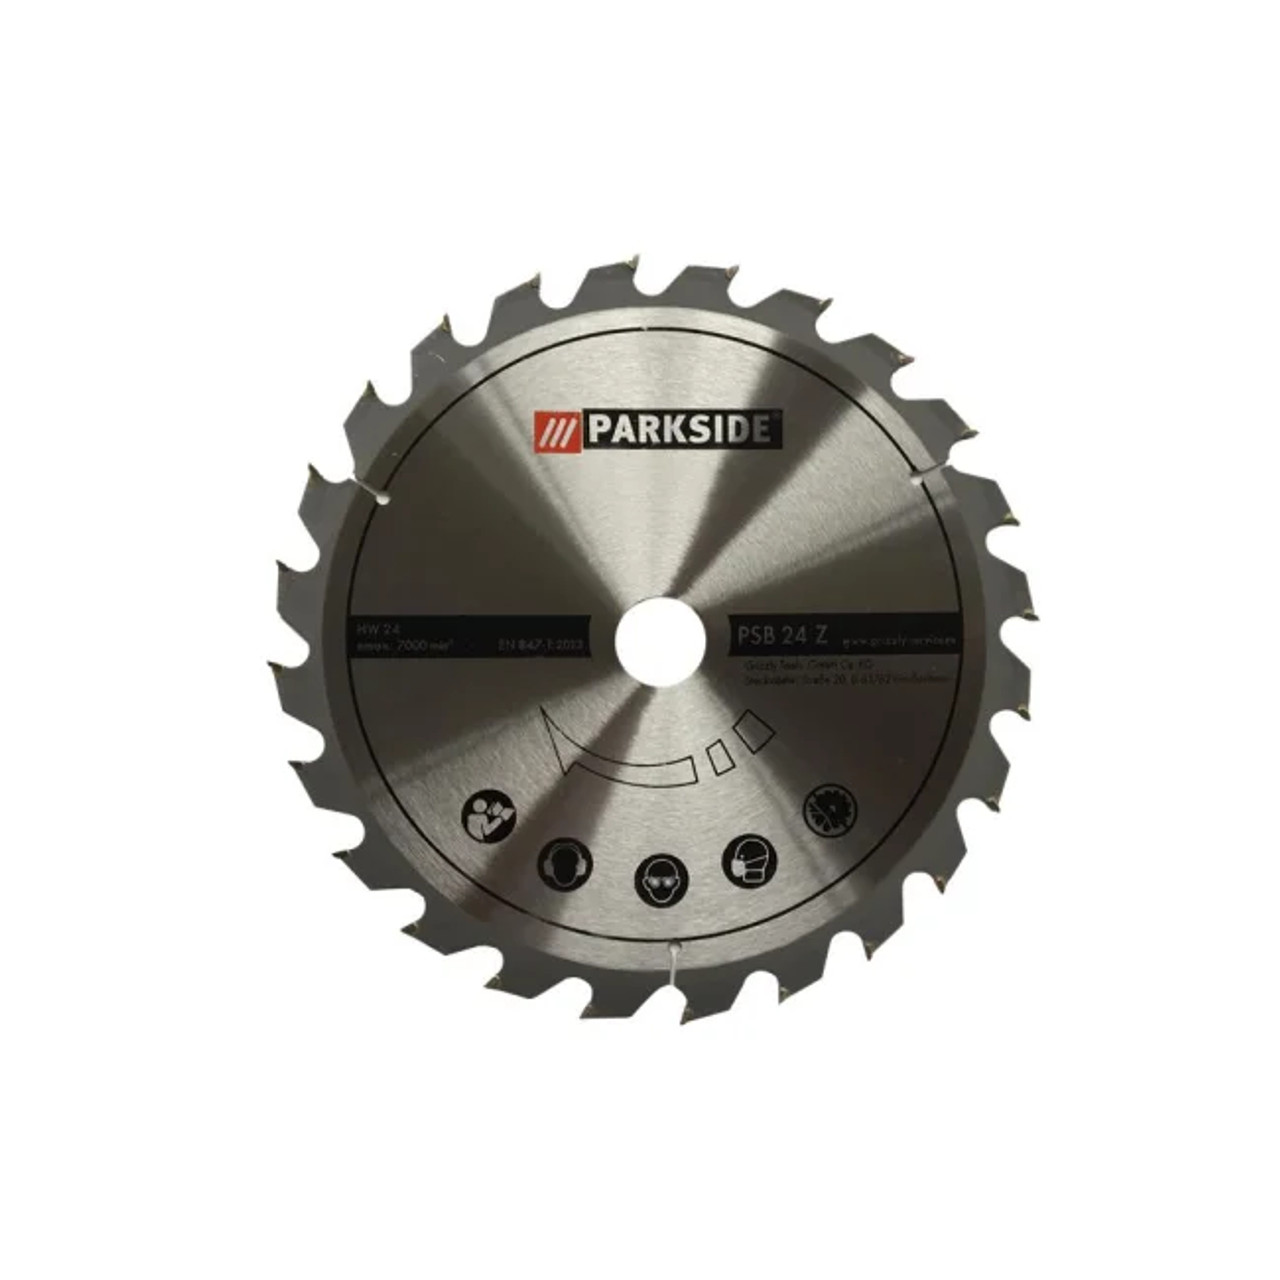 Saw blade 24 tooth for Parkside TableSaws